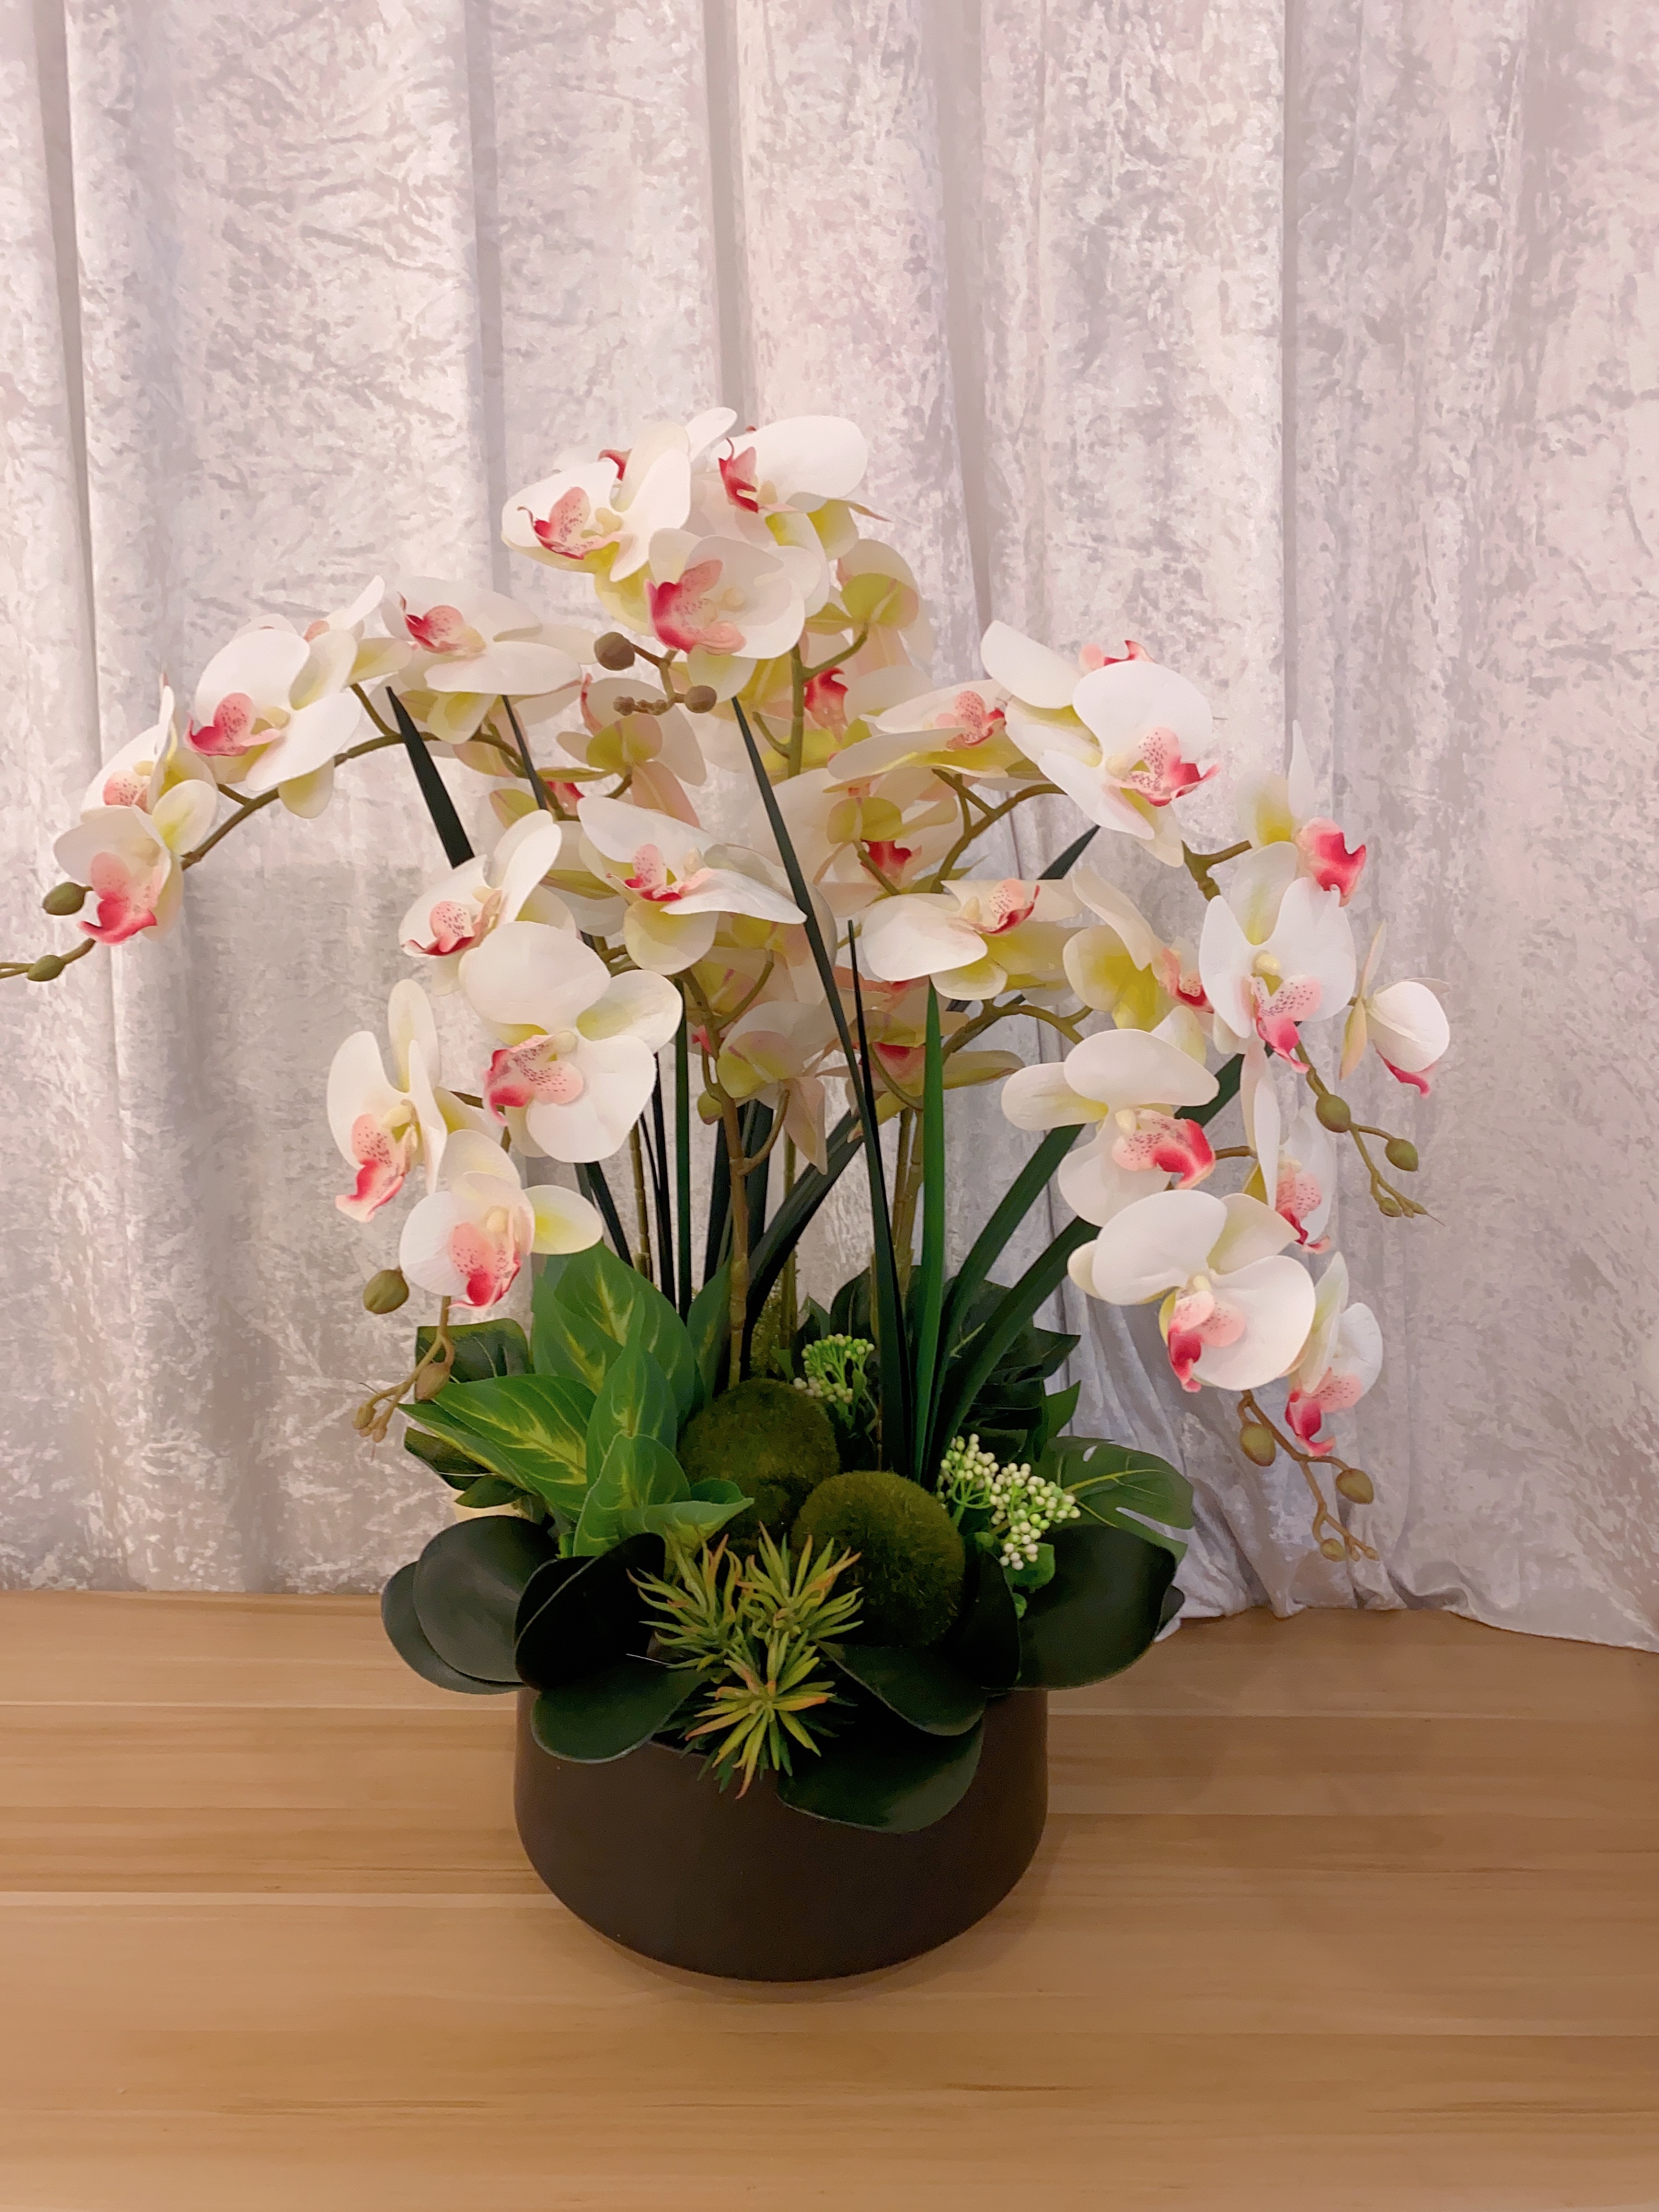 1. Orchid Oasis - White